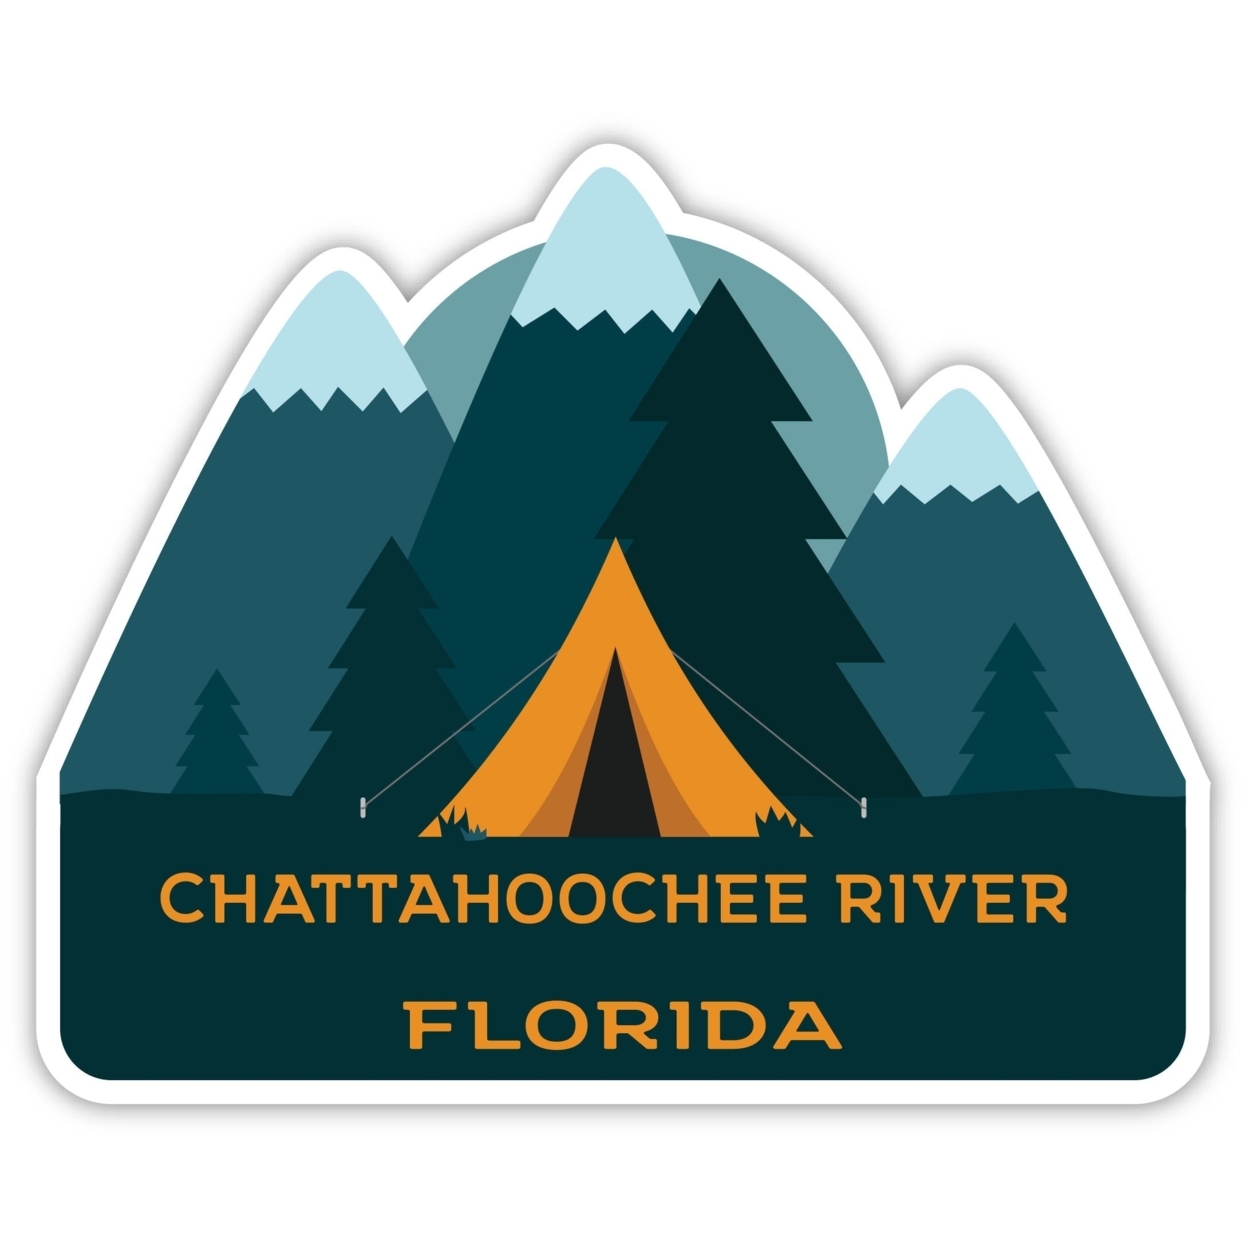 Chattahoochee River Florida Souvenir Decorative Stickers (Choose Theme And Size) - 4-Pack, 2-Inch, Tent